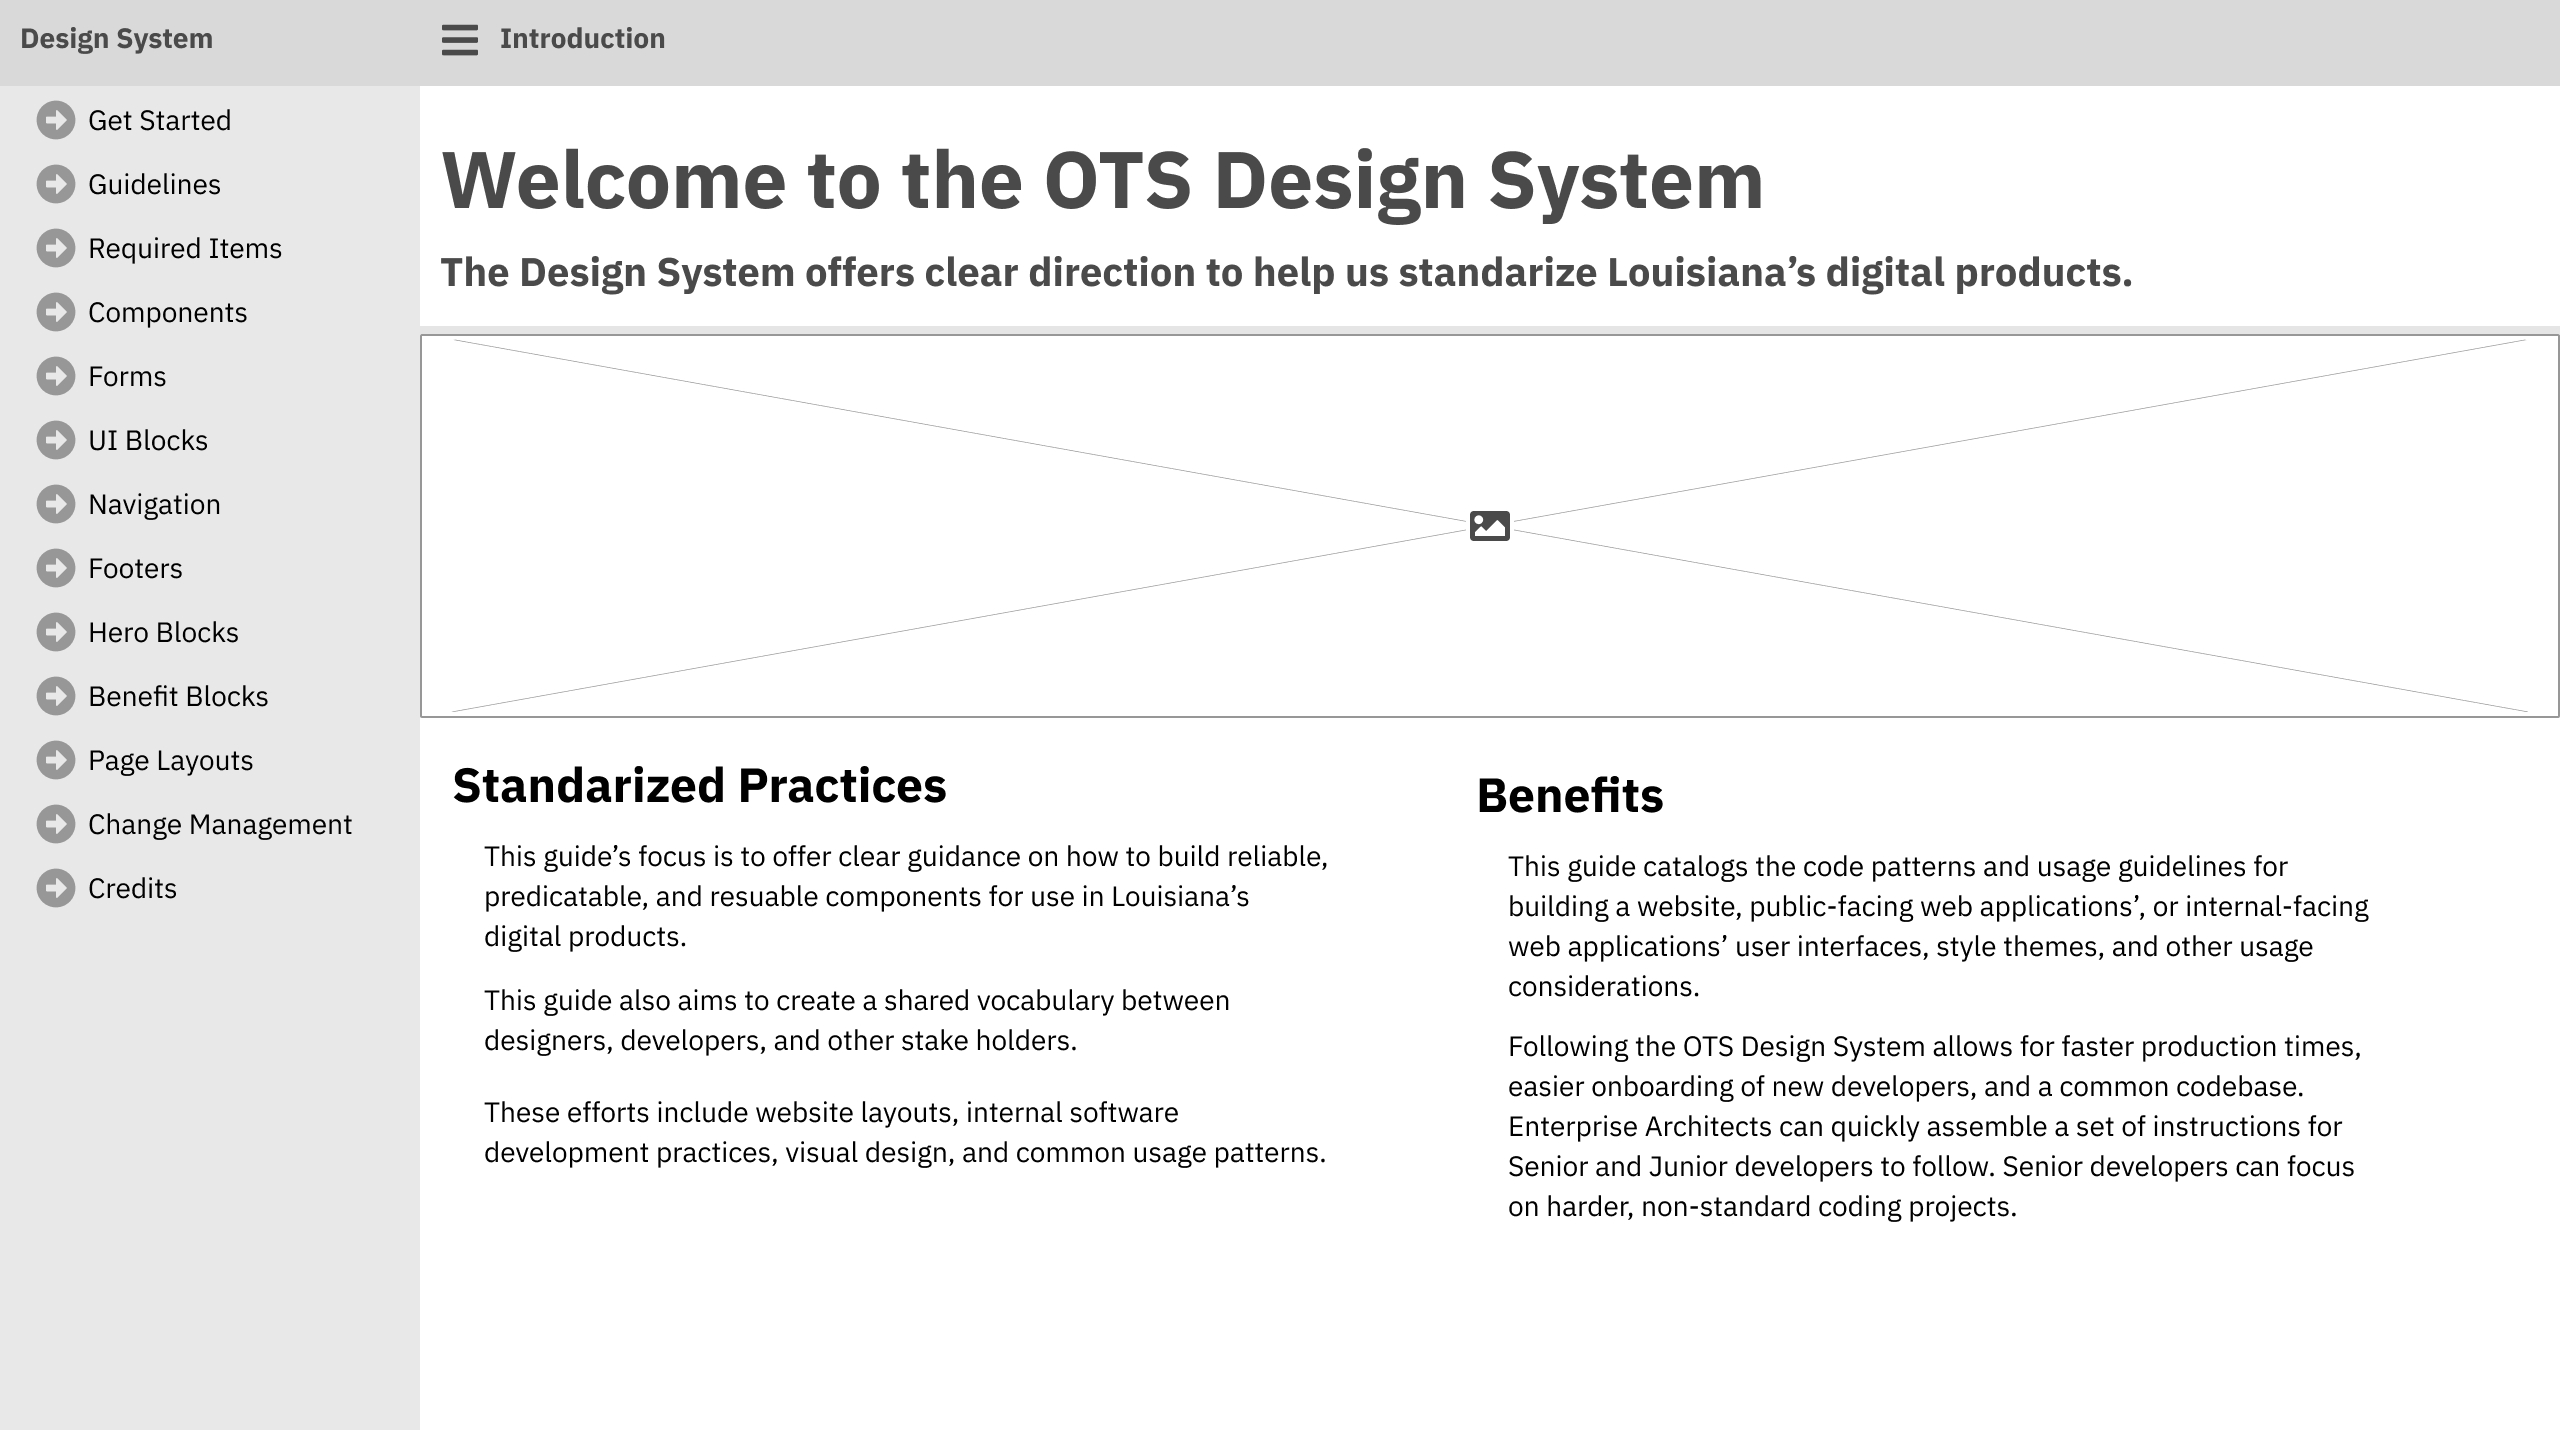 Digital wireframe snippet of the homepage design.